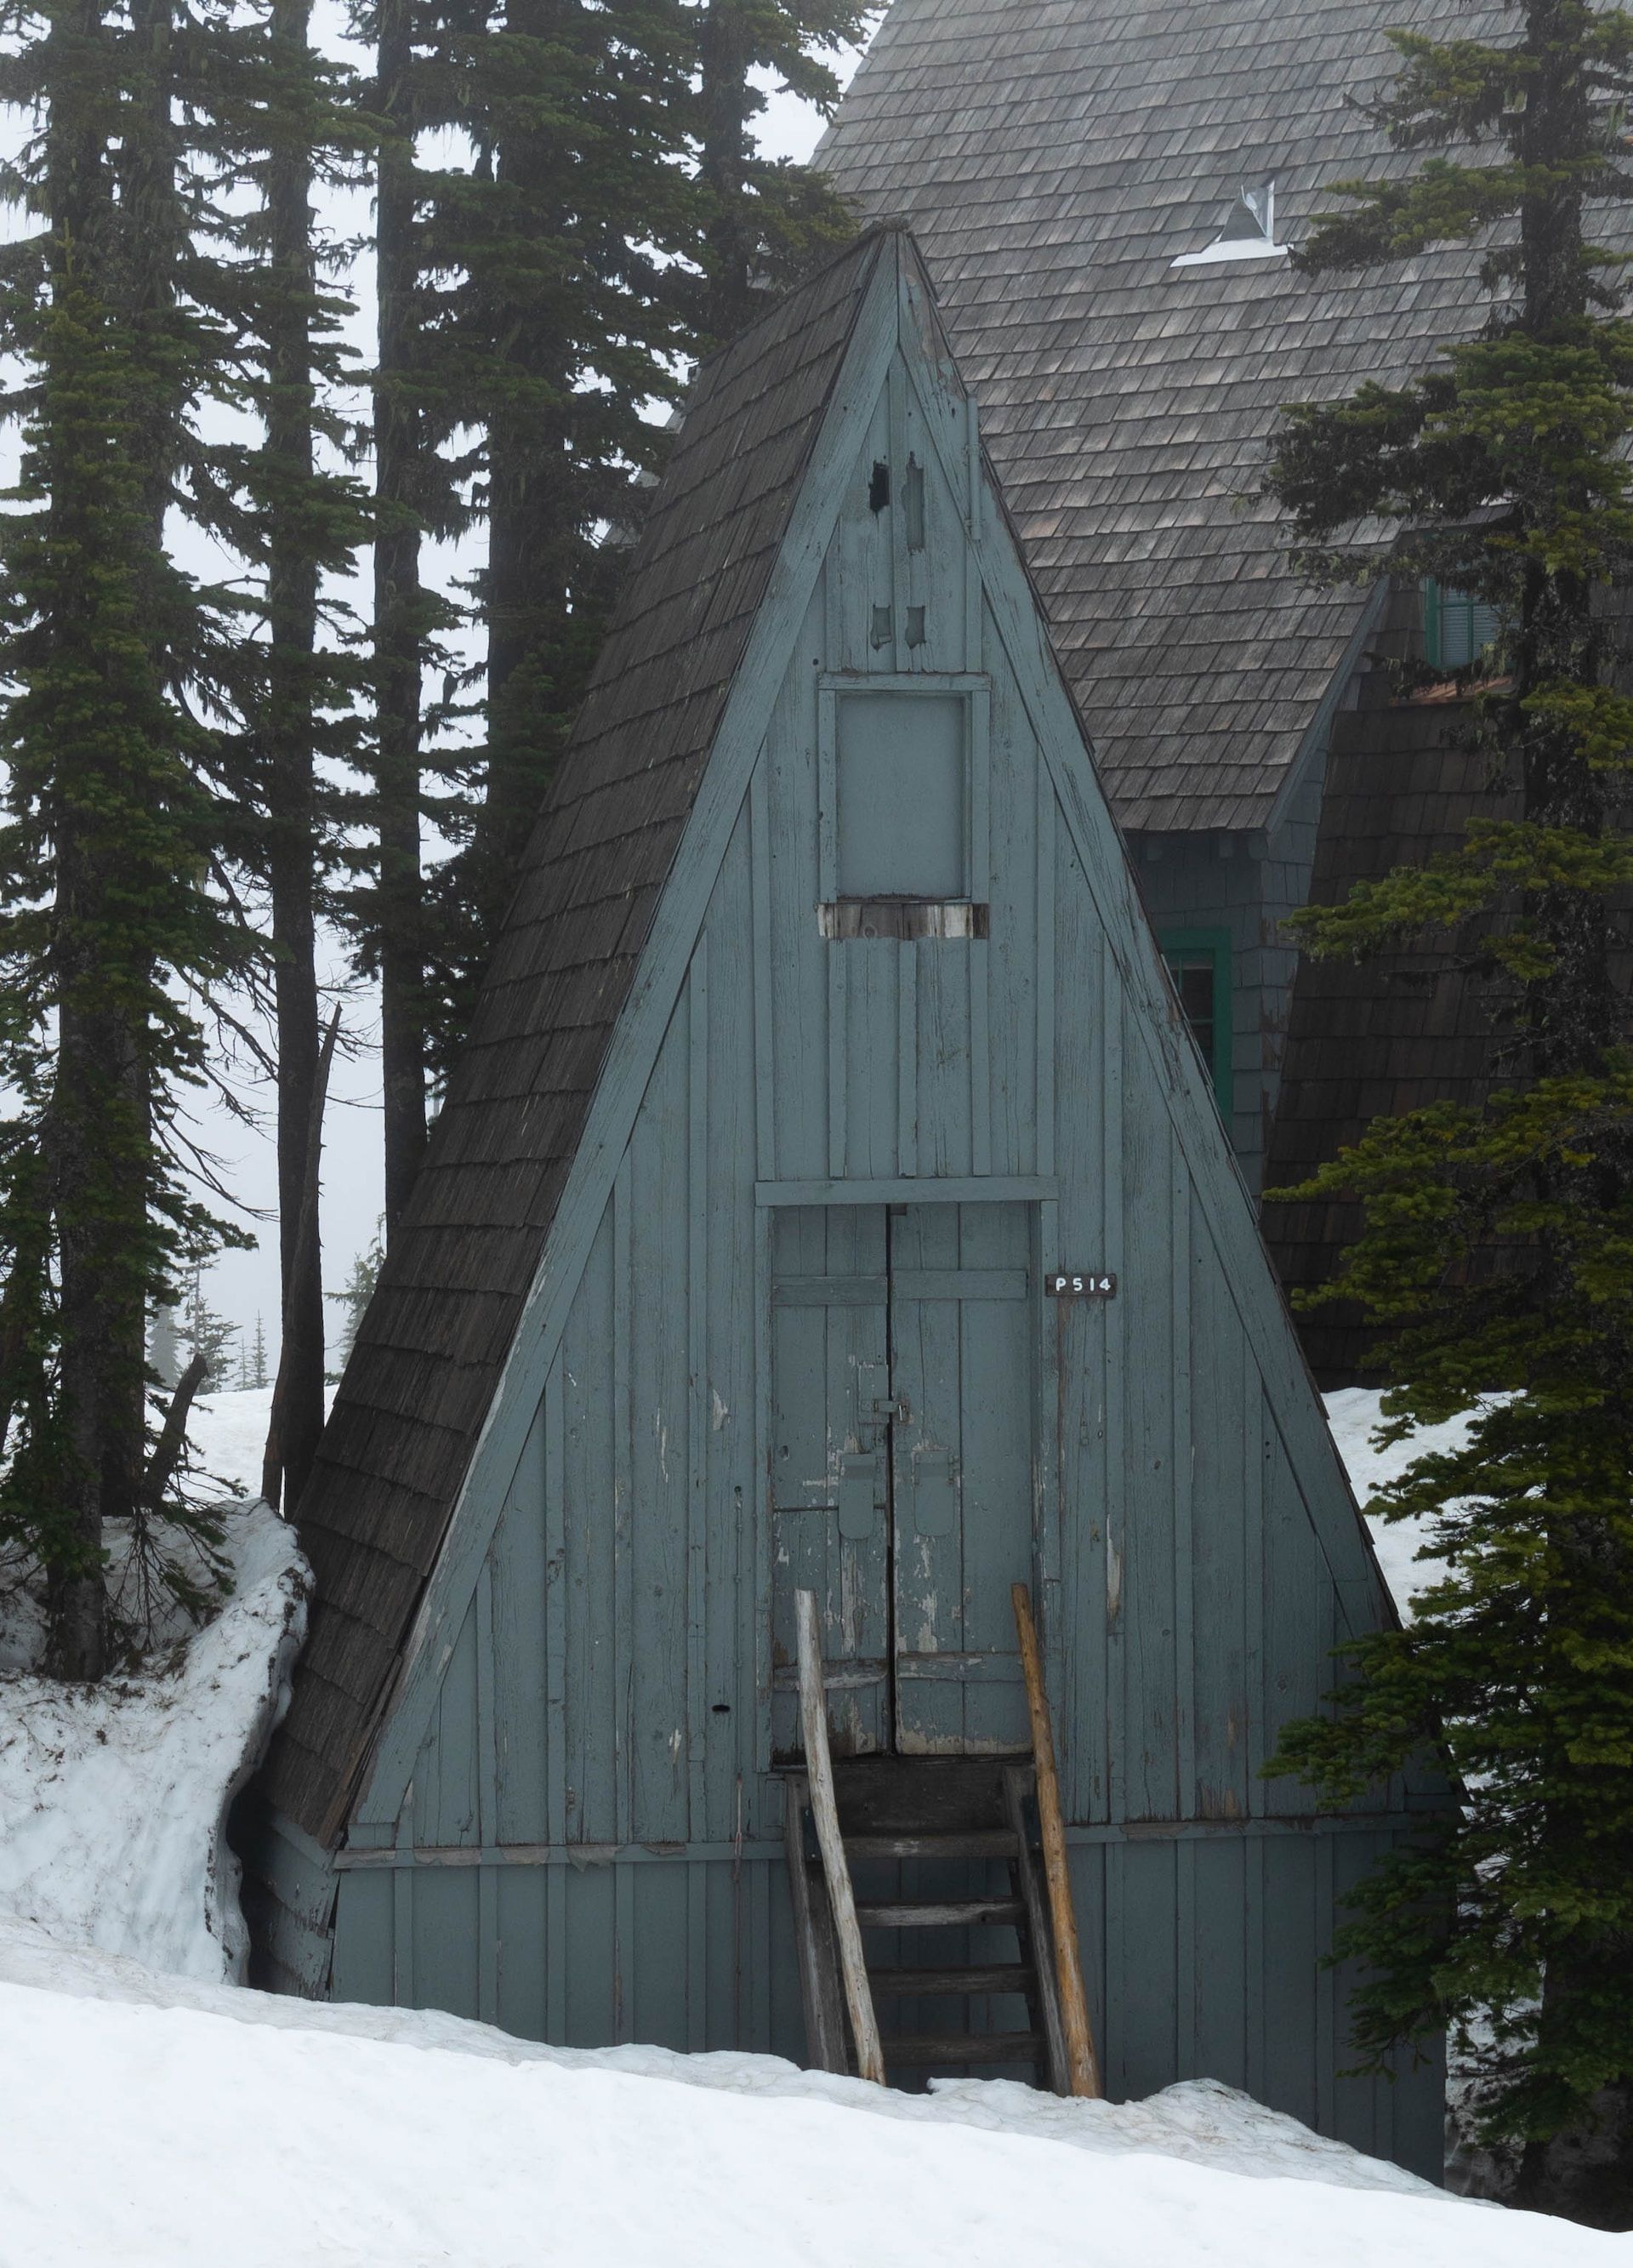 A cabin in the snow in Mt Rainier National Park